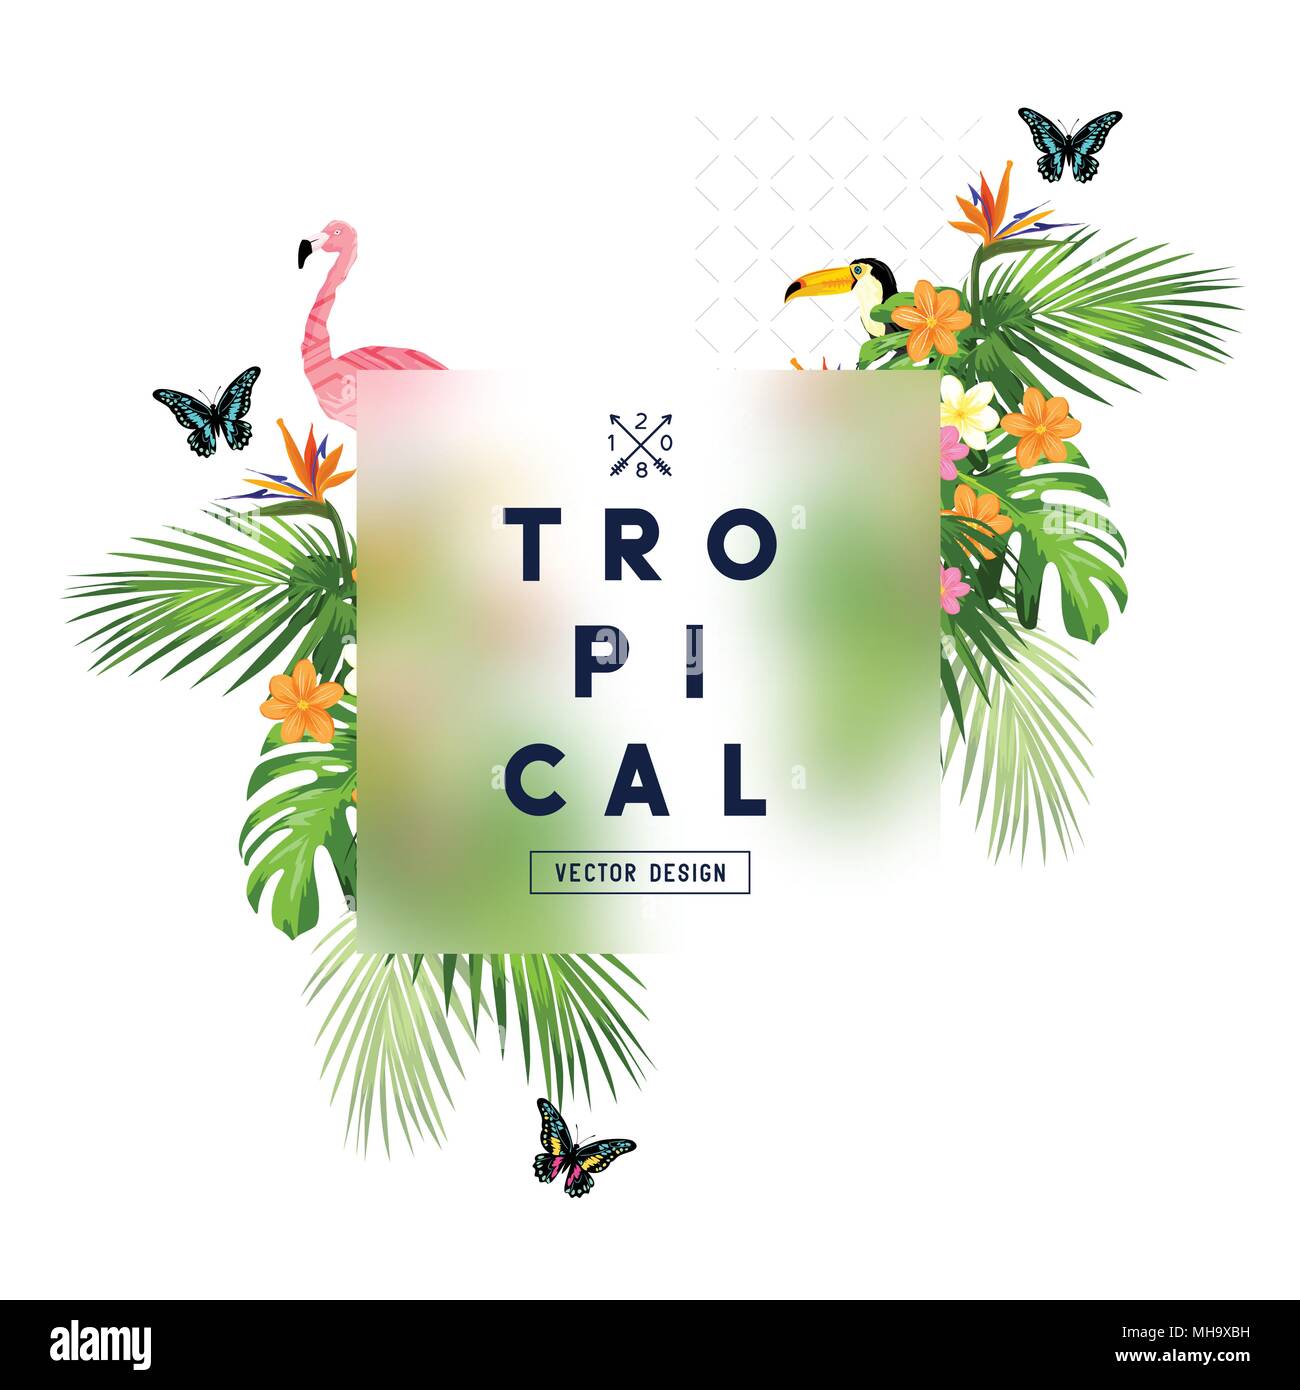 Tropical rainforest frame with palm tree leaves, floral elements, and wildlife. Vector illustration Stock Vector